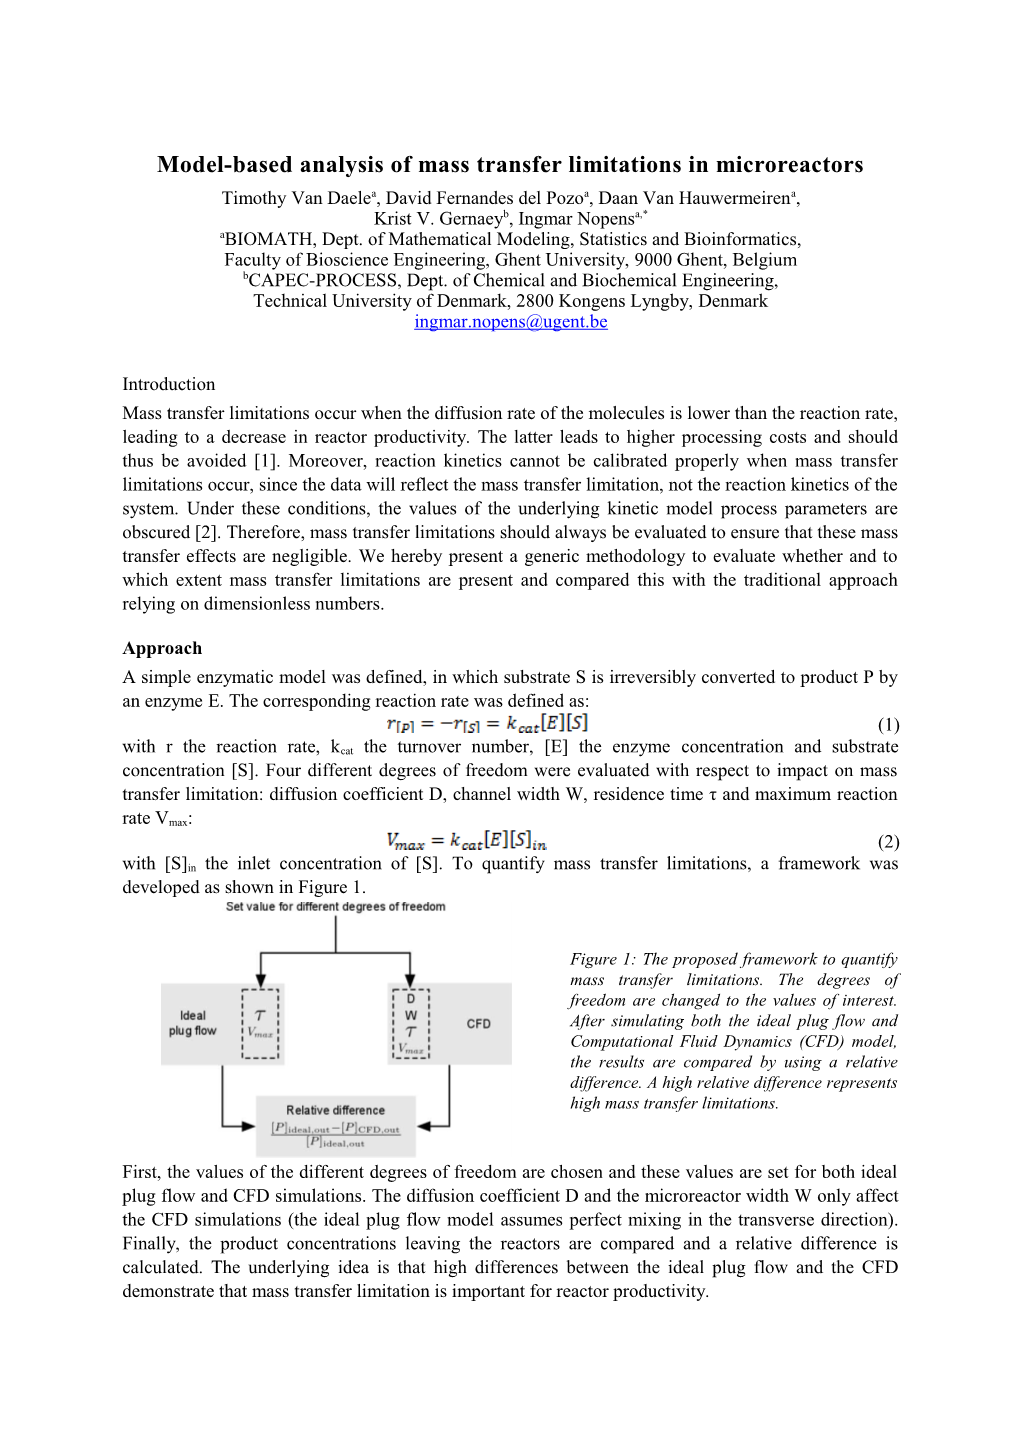 Model-Based Analysis of Mass Transfer Limitations in Microreactors